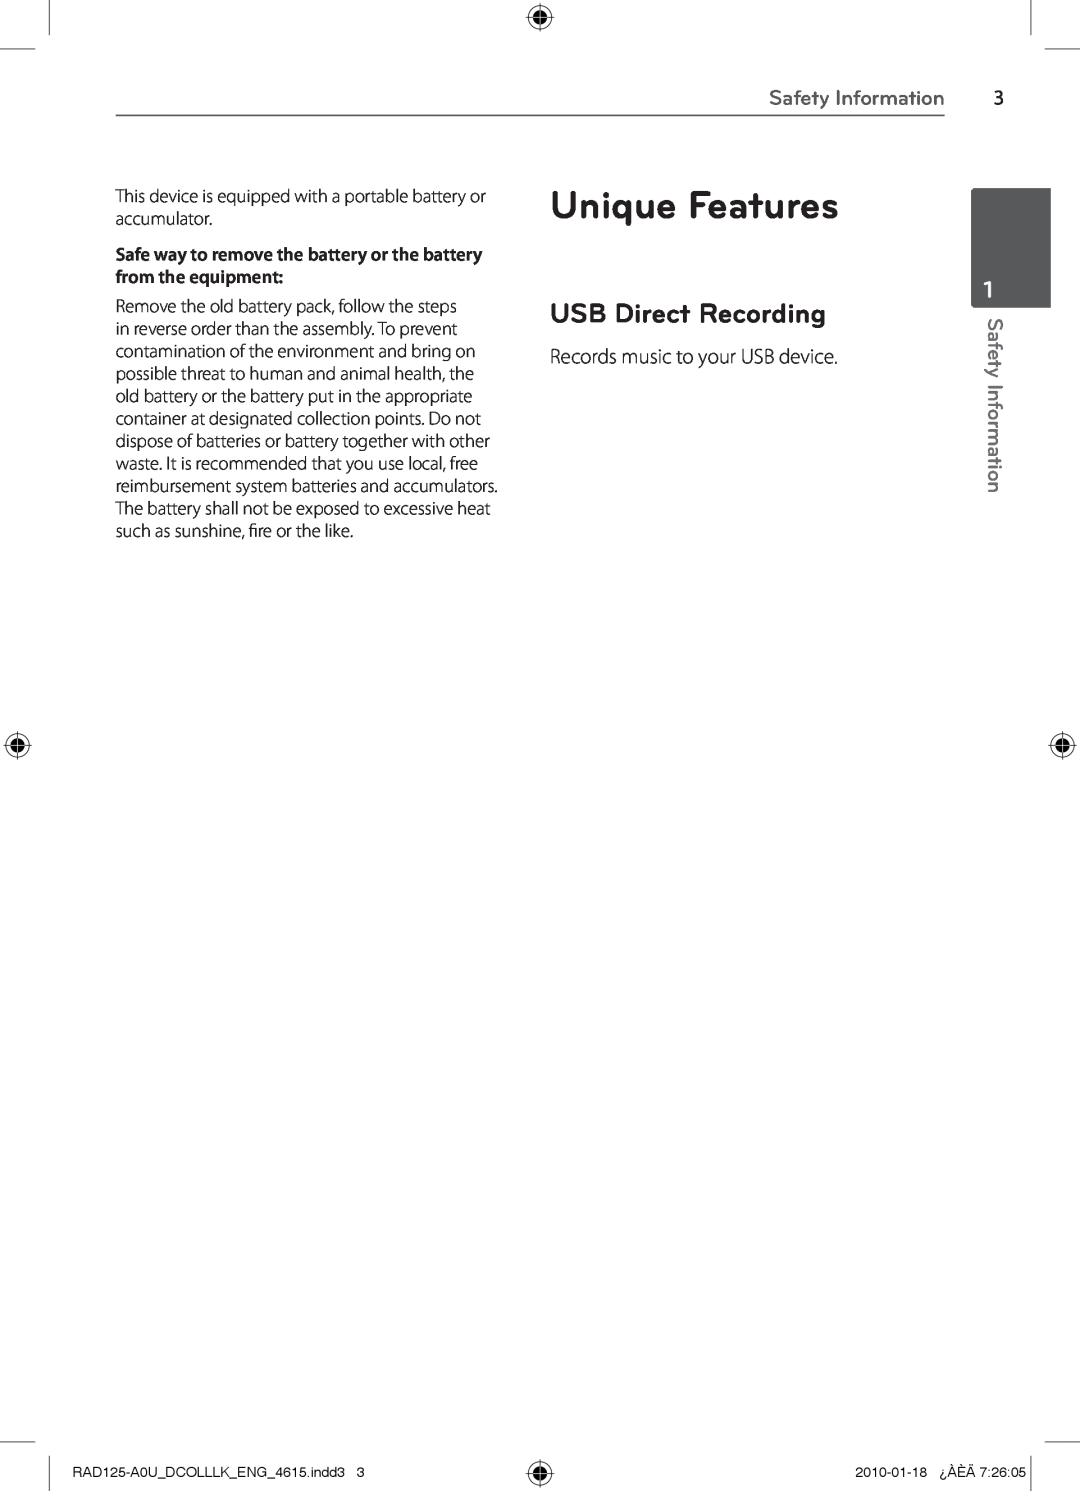 LG Electronics MFL63284615, RAS125F, RAD125 owner manual Unique Features, USB Direct Recording, Safety Information 